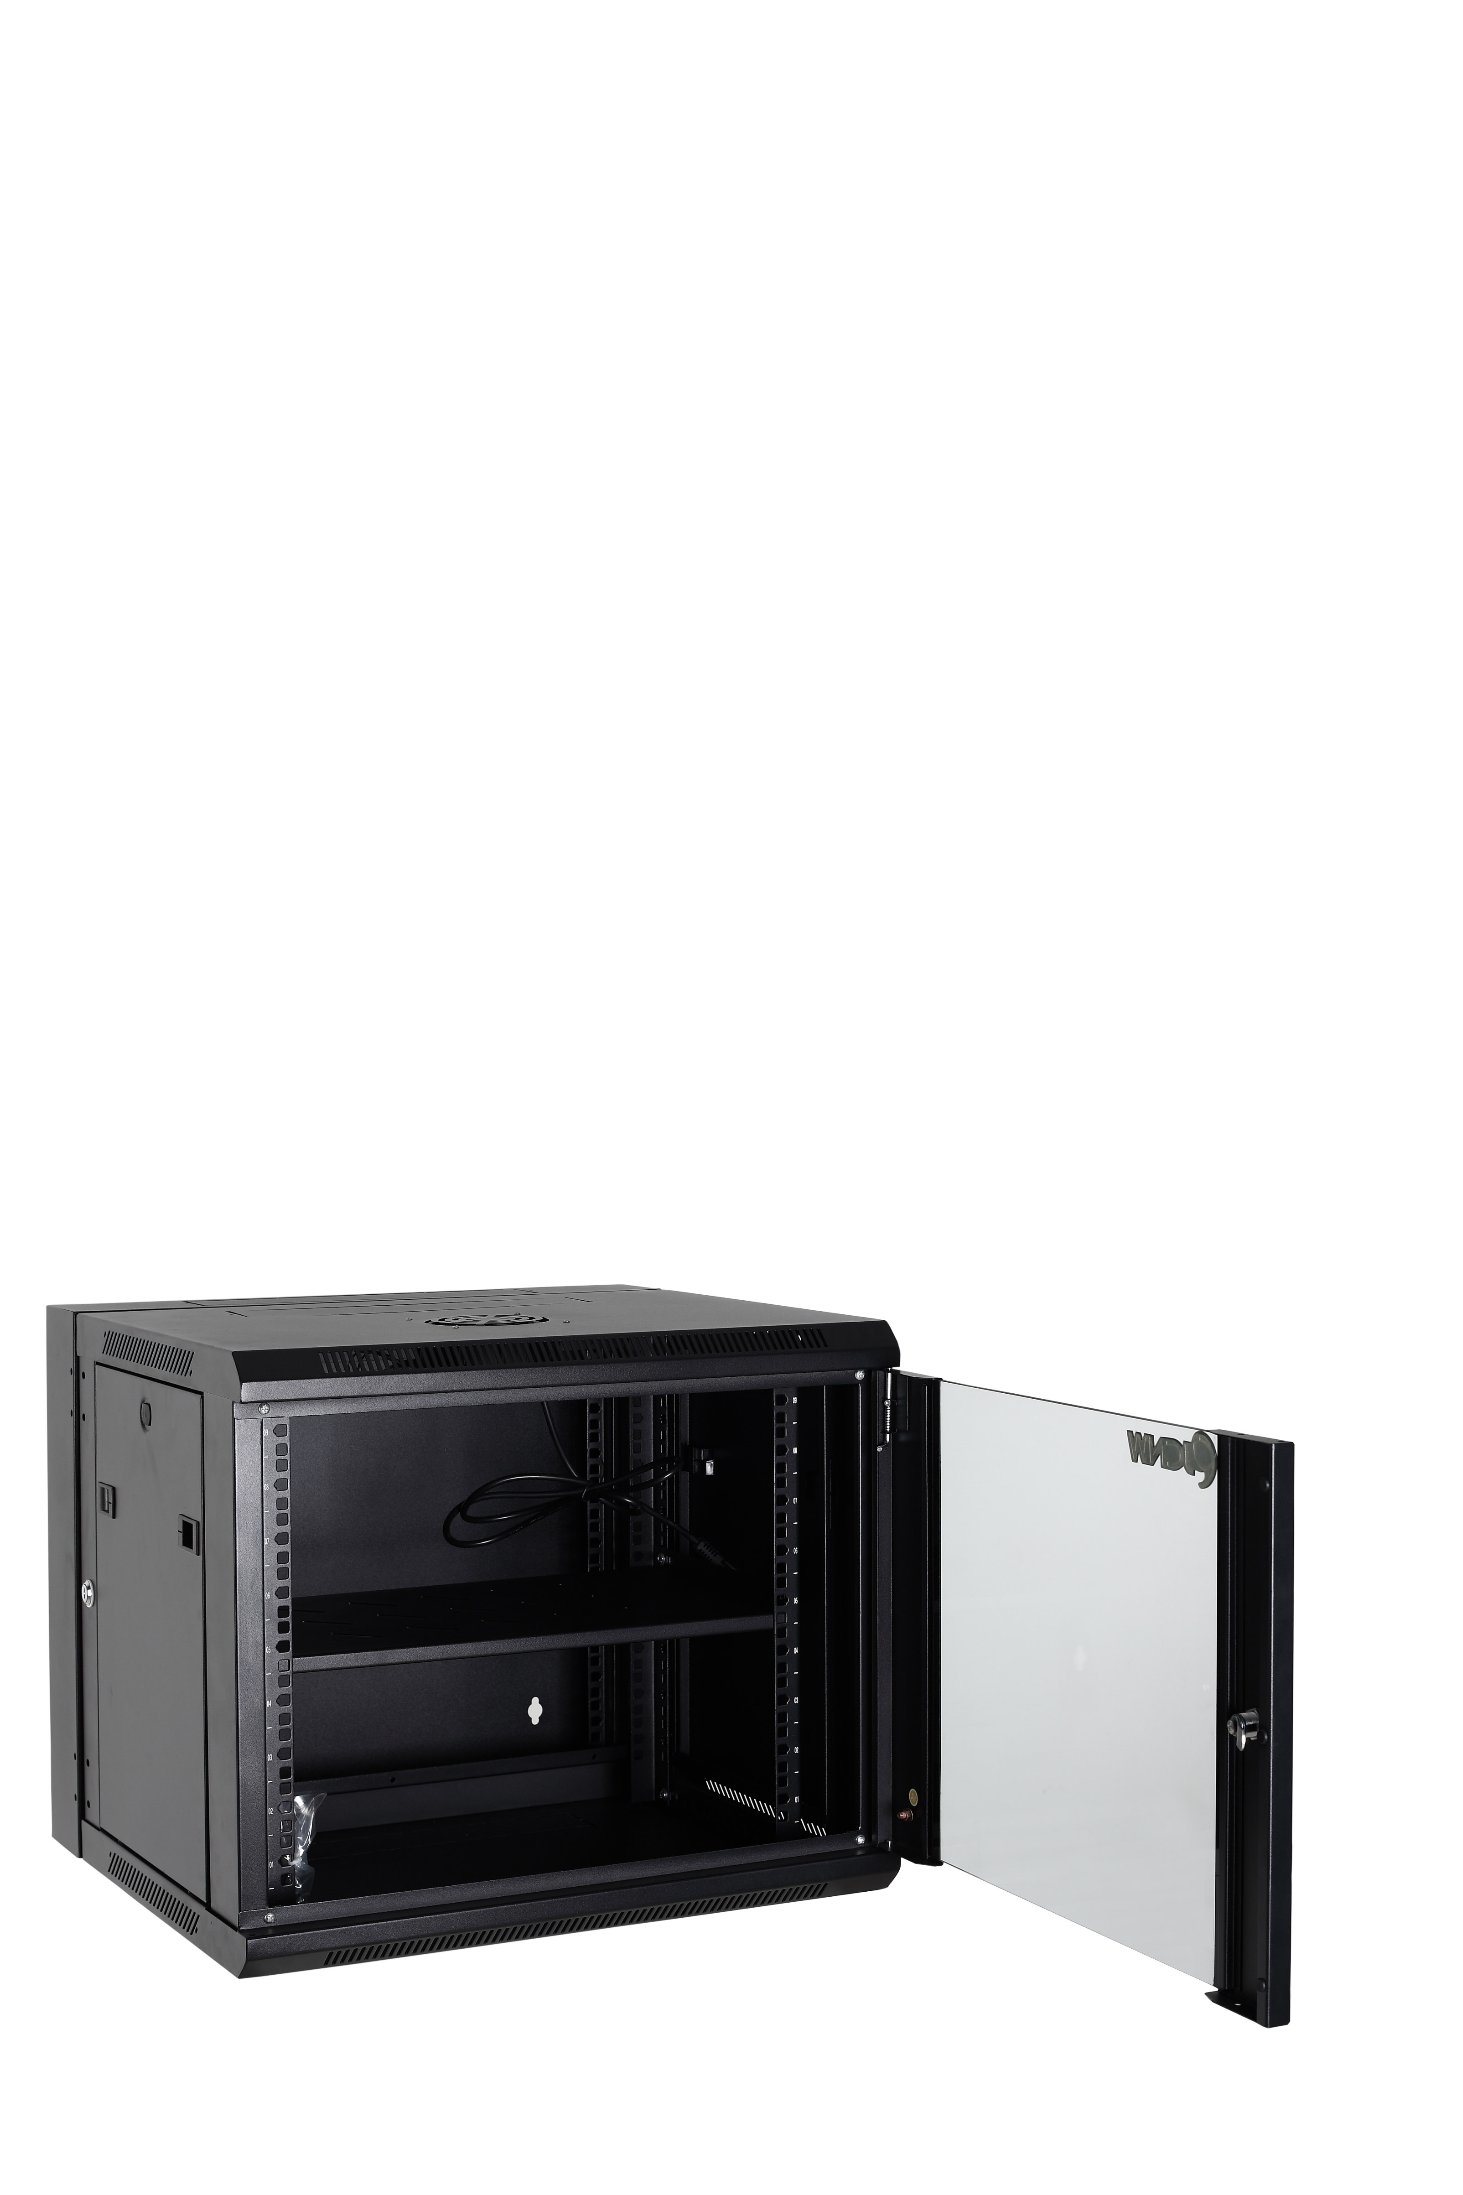 19 Rack Server Cabinet Wall Mounted Cabinets